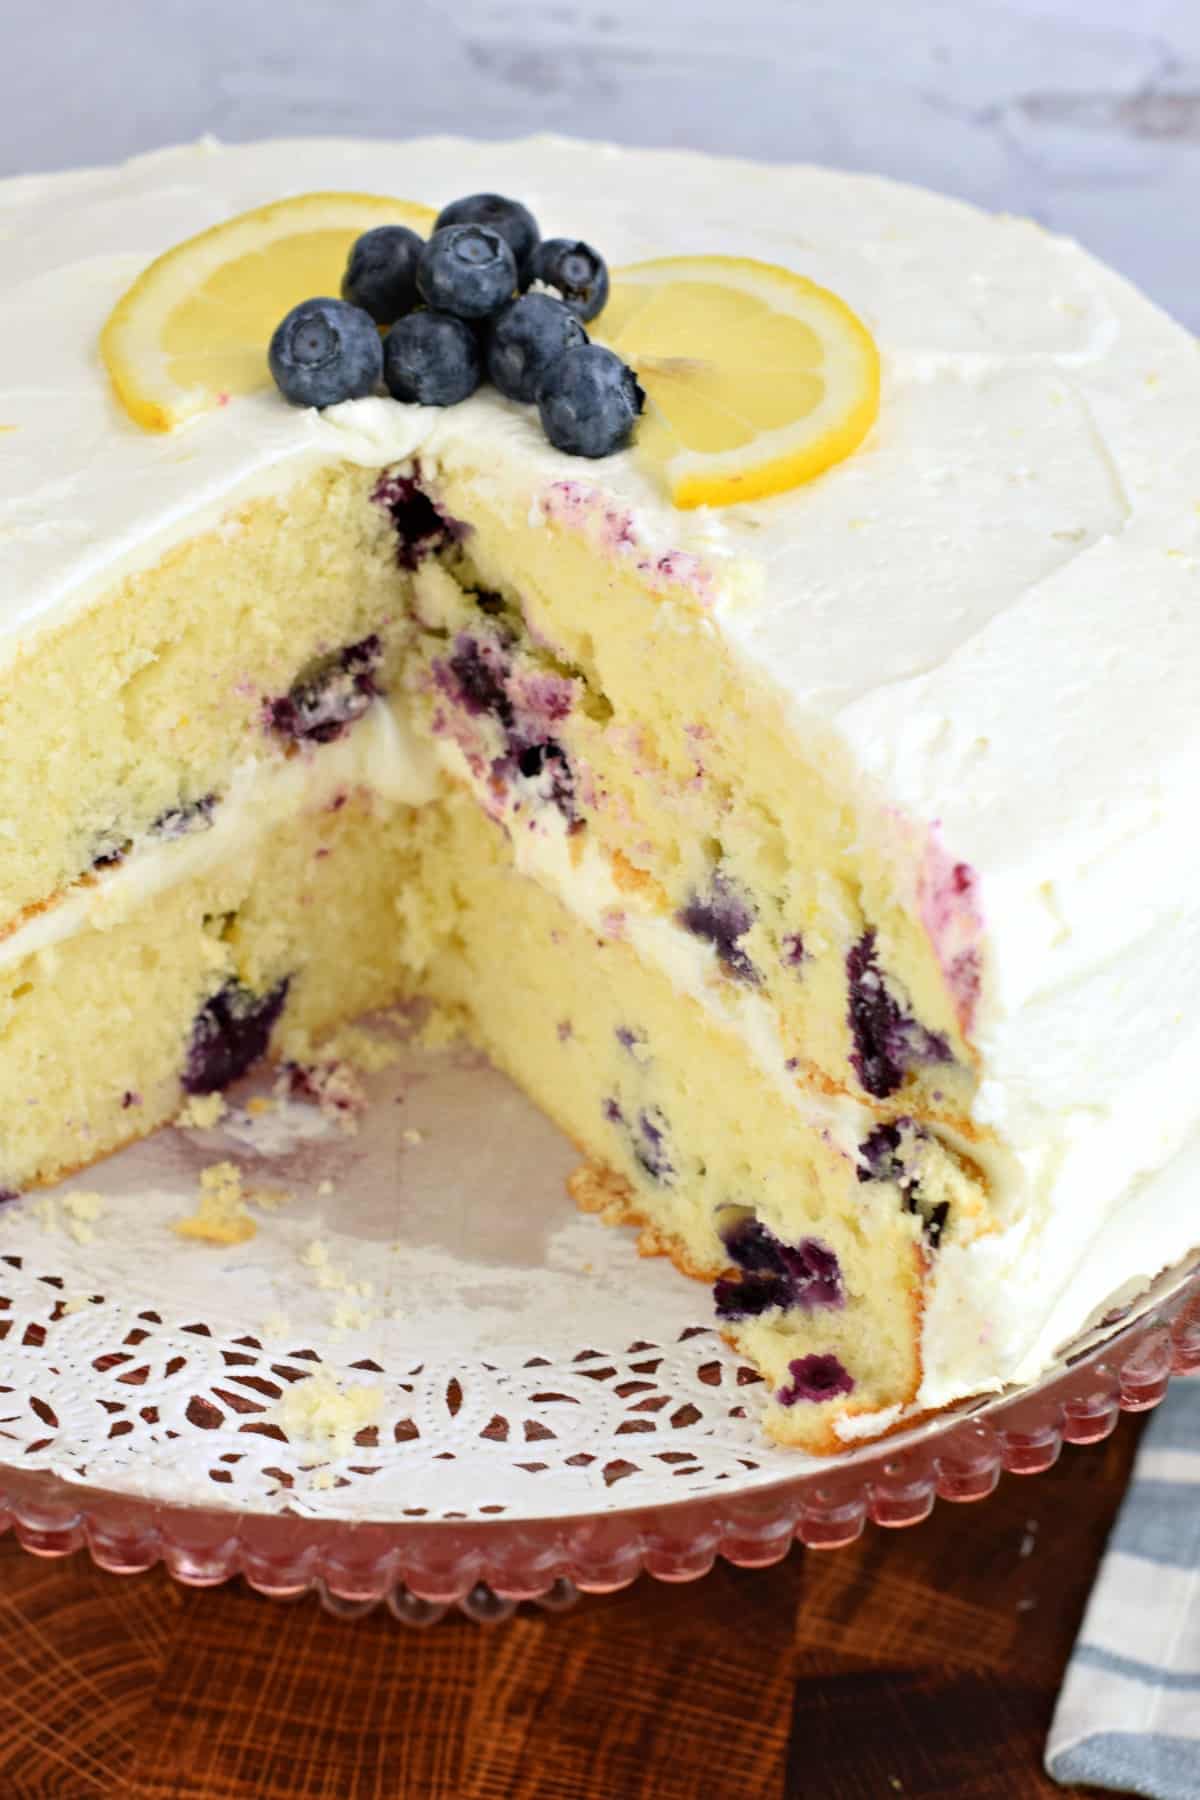 Lemon cake with blueberries on a doily topped wooden cake stand, with a slice removed. Garnished with fresh blueberries and slices of lemon.